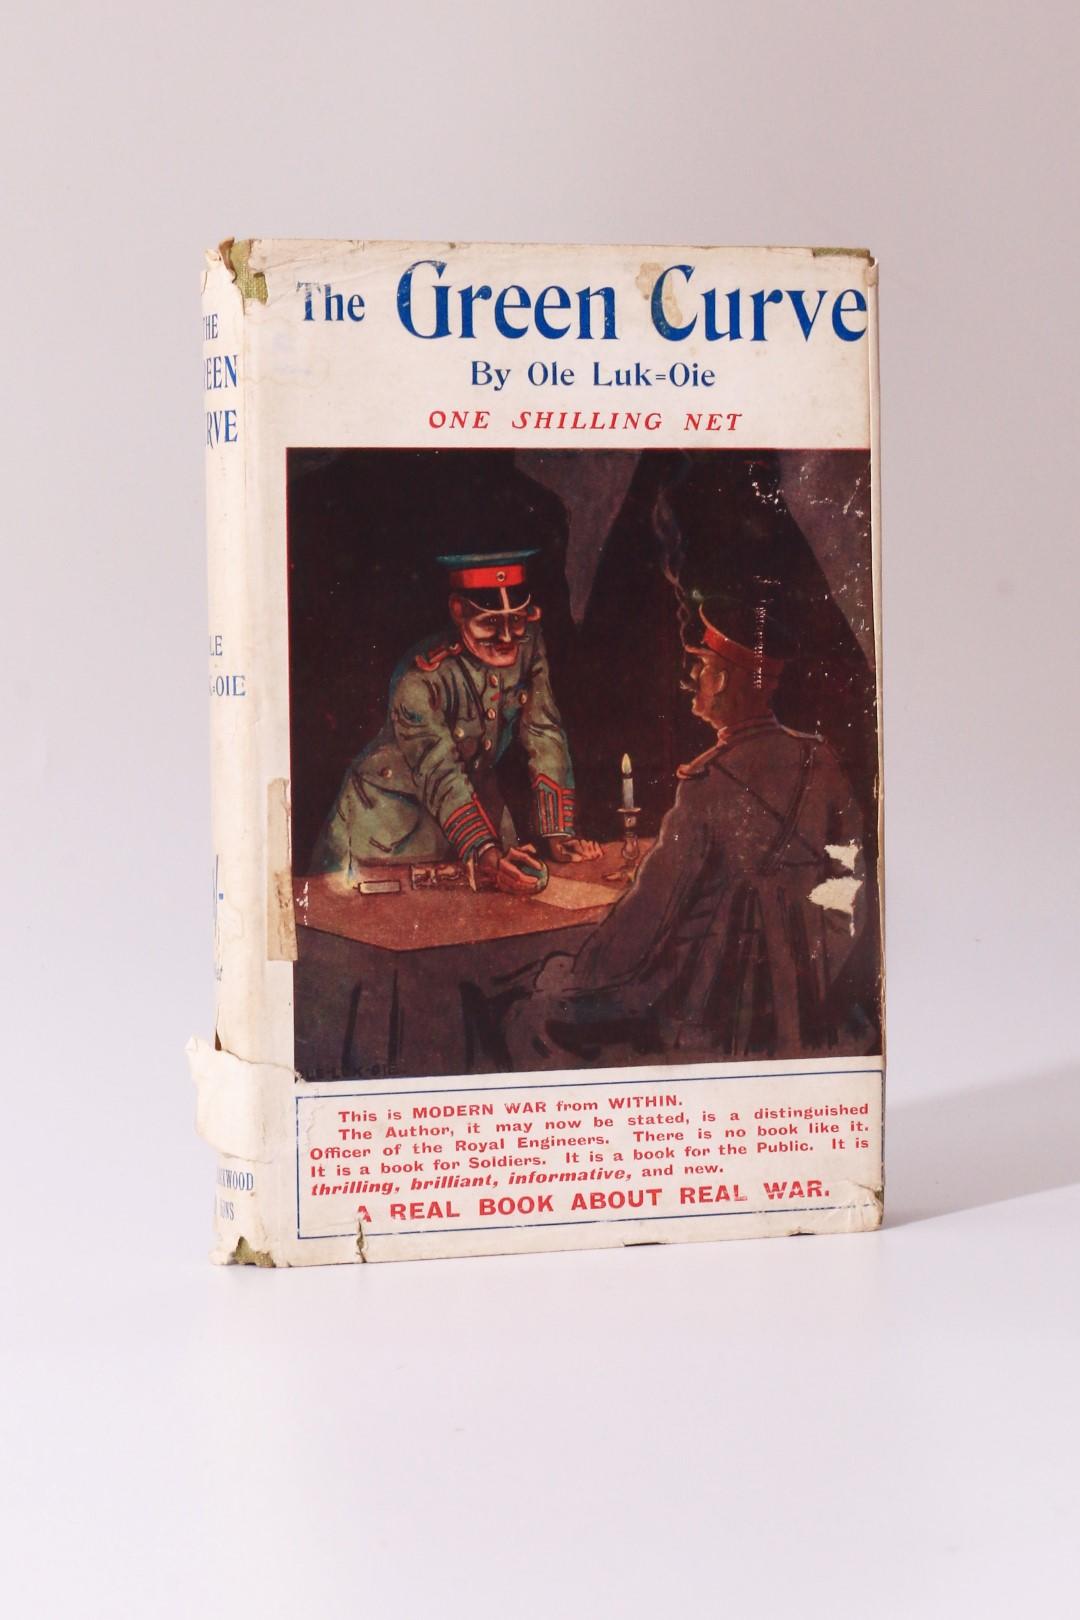 Ole Luk-Oie - The Green Curve - Blackwood and Sons, 1914, Later Edition.